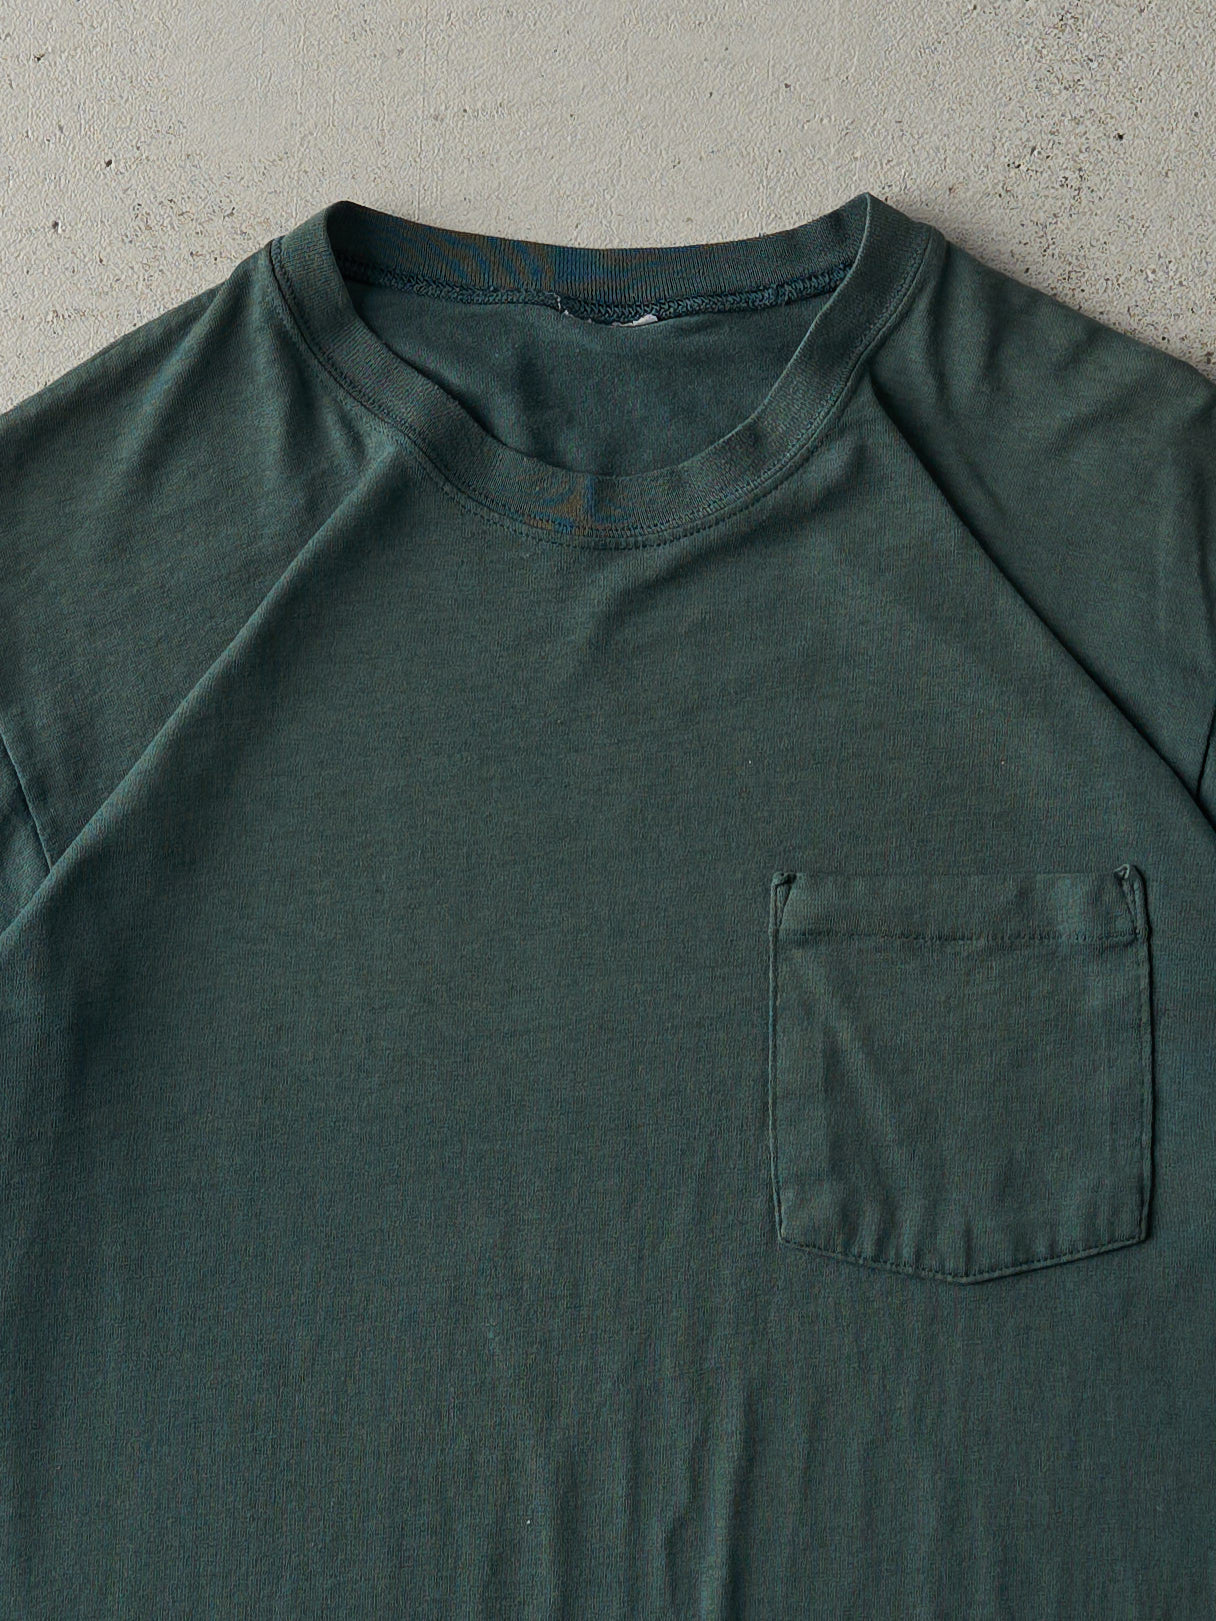 Vintage 90s Forest Green Blank Pocket Tee (S/M)